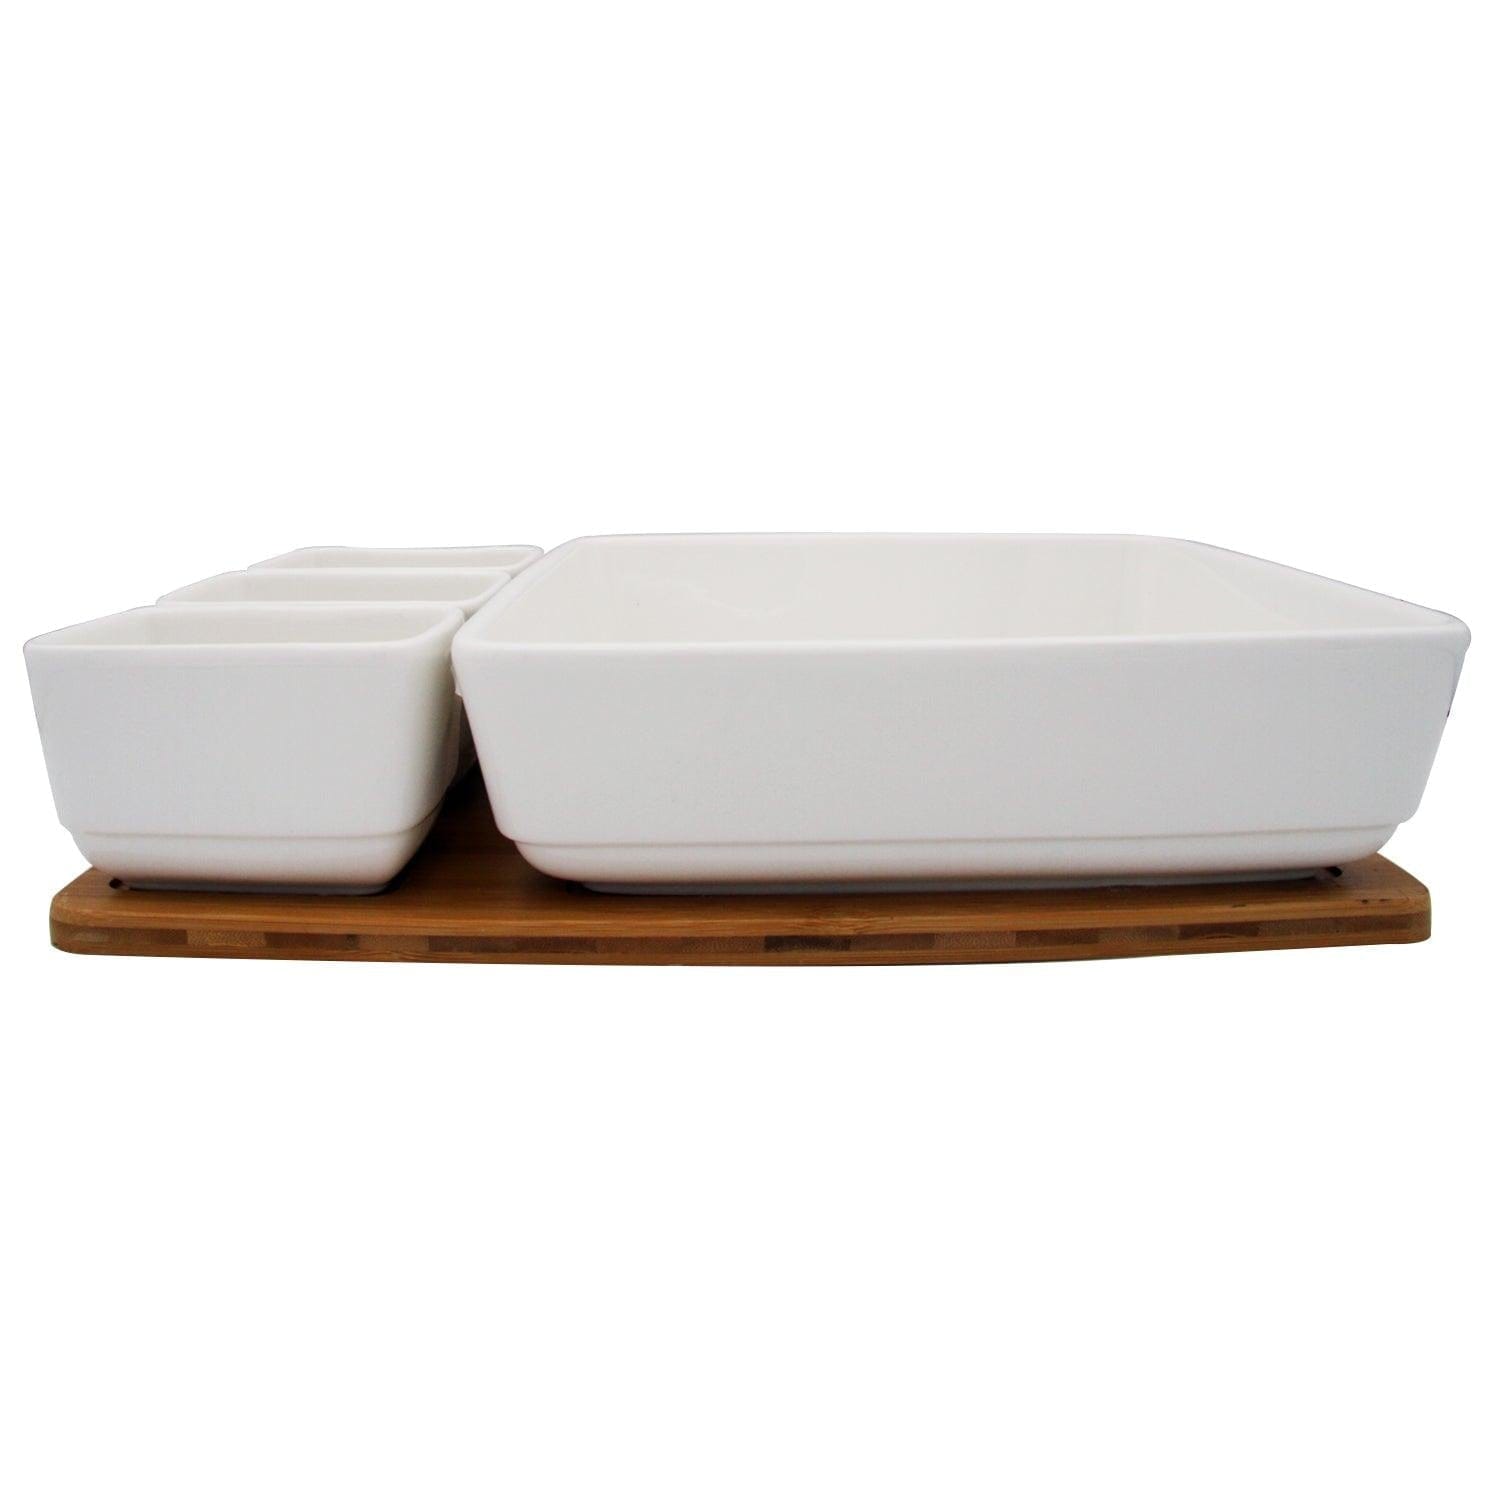 Square Serving Bowl with 3 Dip Bowls and Wooden Tray Set